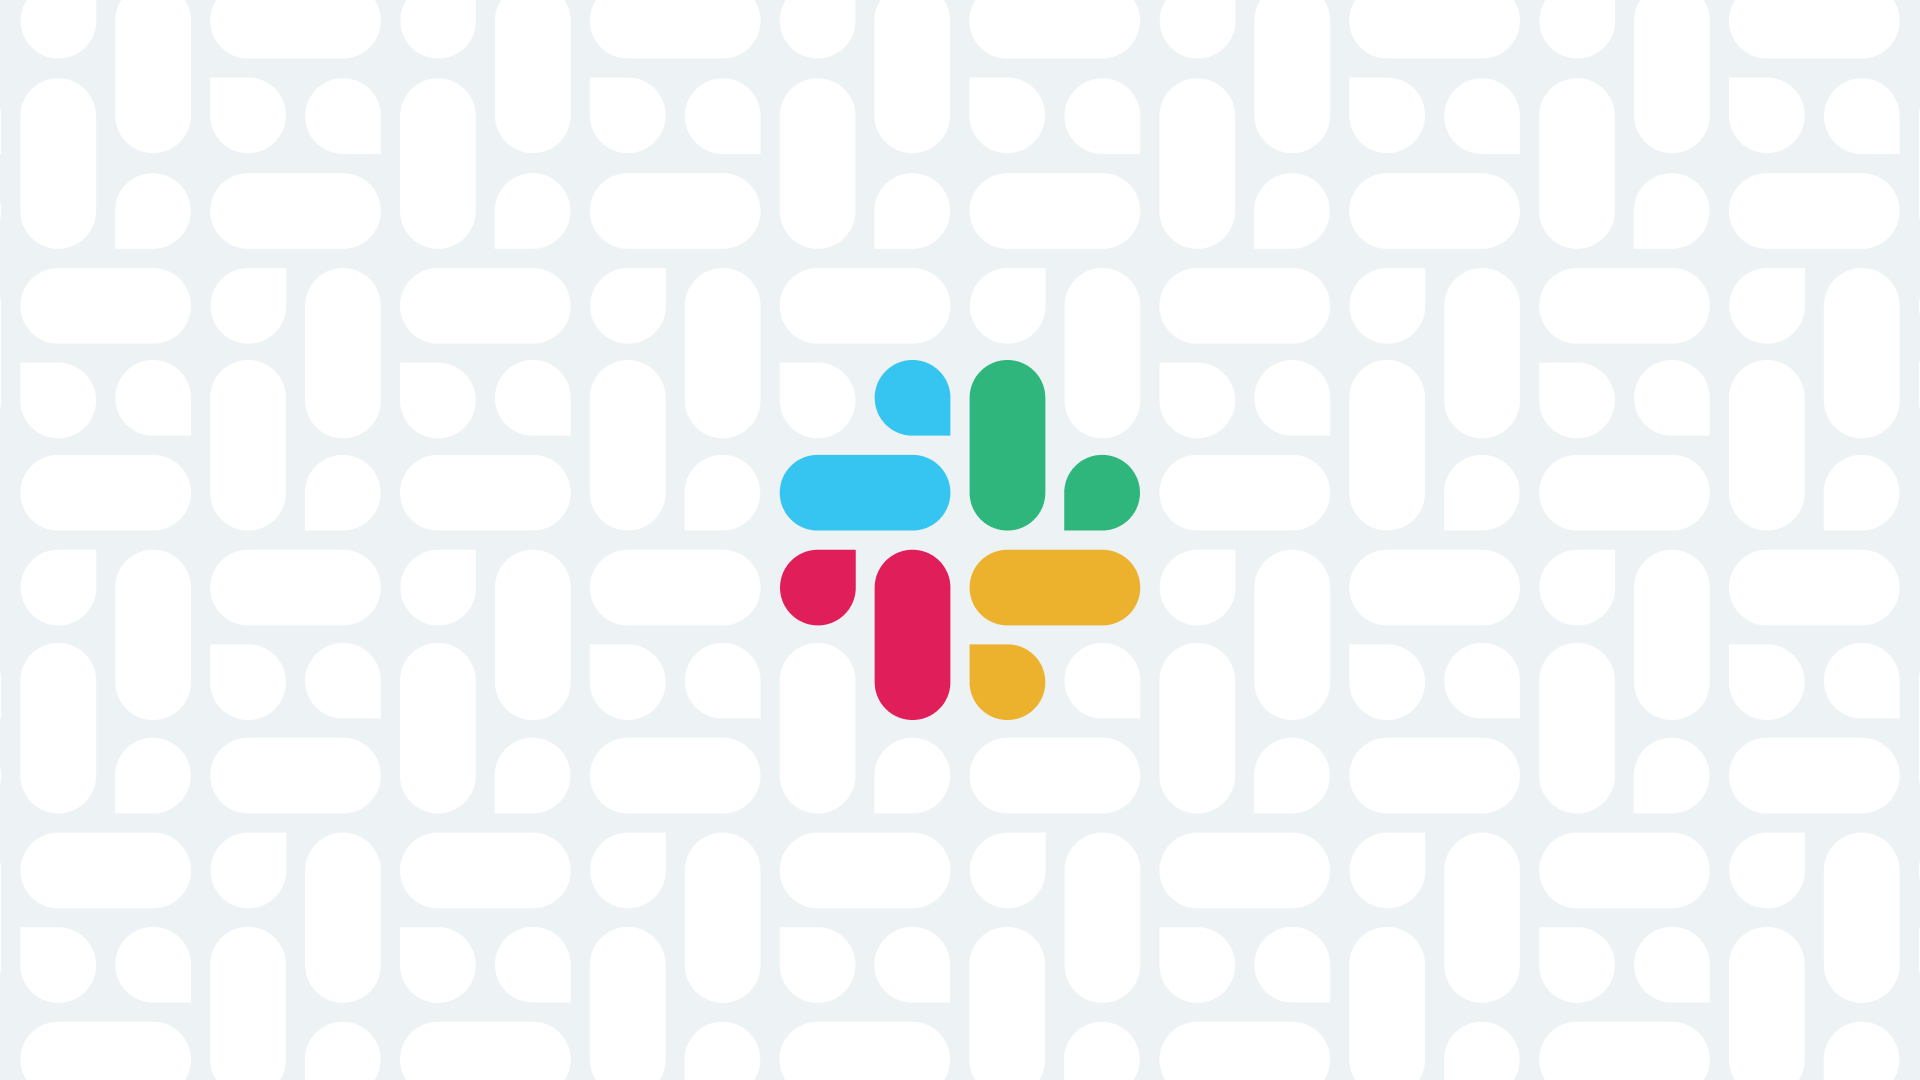 Indy Splunkers Unite With the Messaging Tool Slack